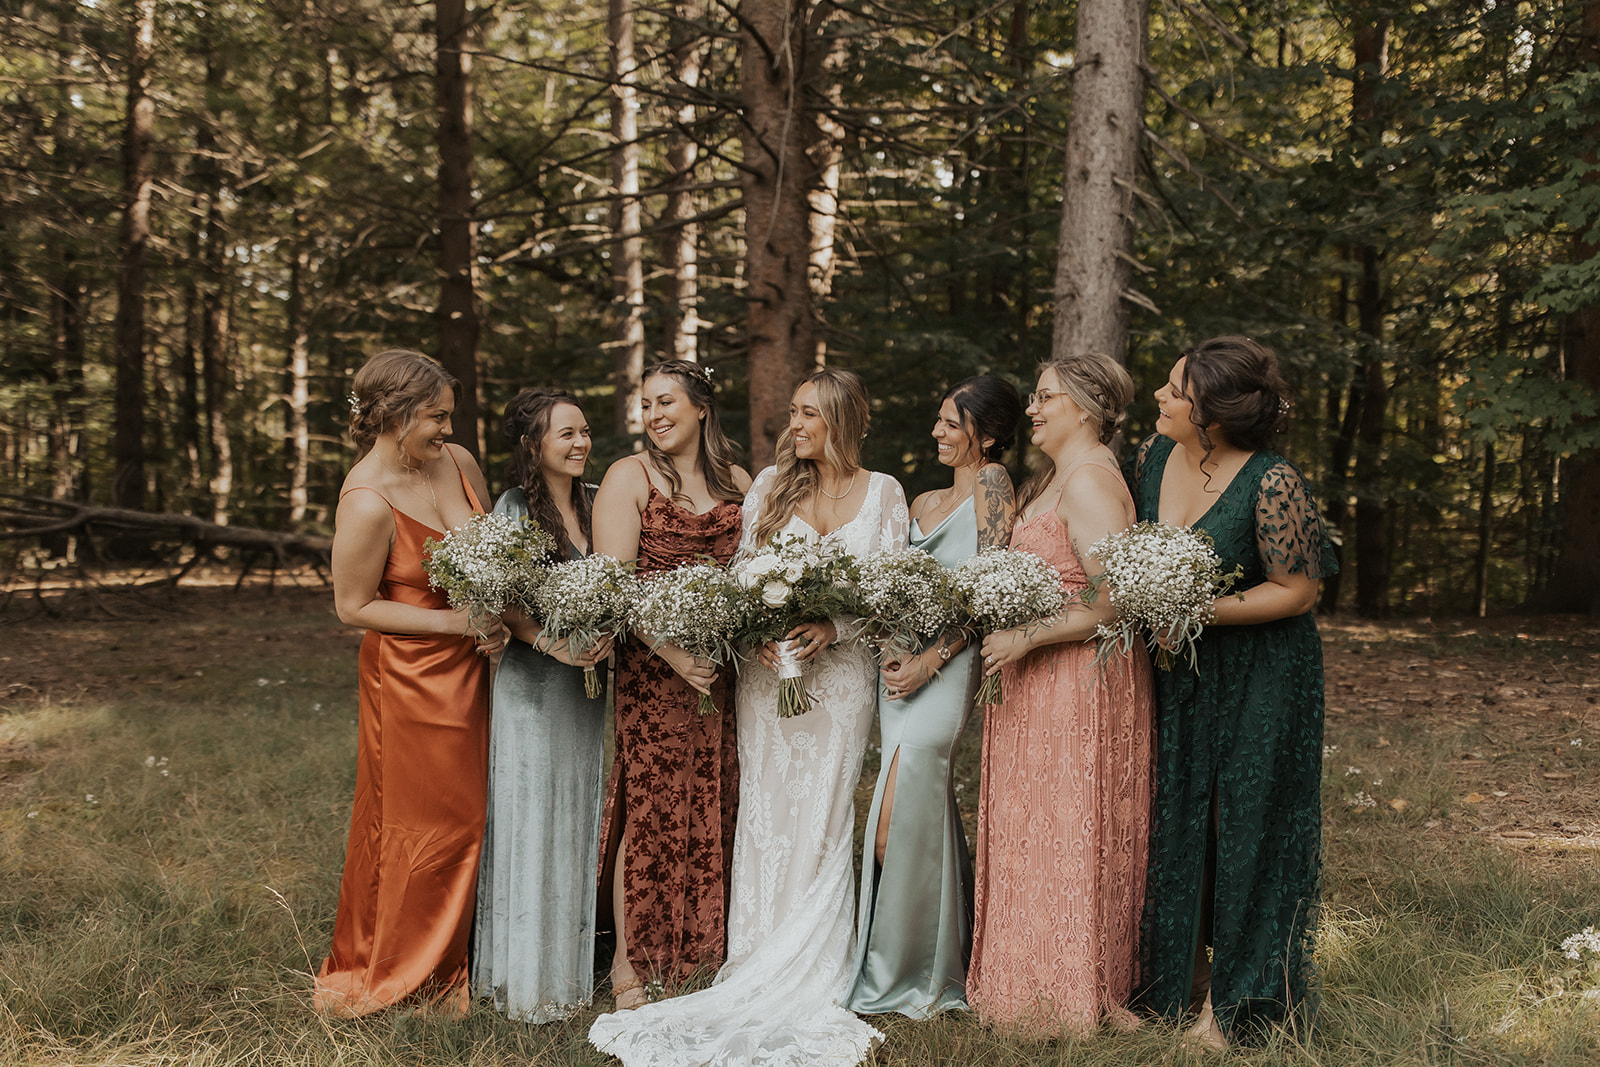 Unconventional-brde-Hannah-with-her-bridesmaids